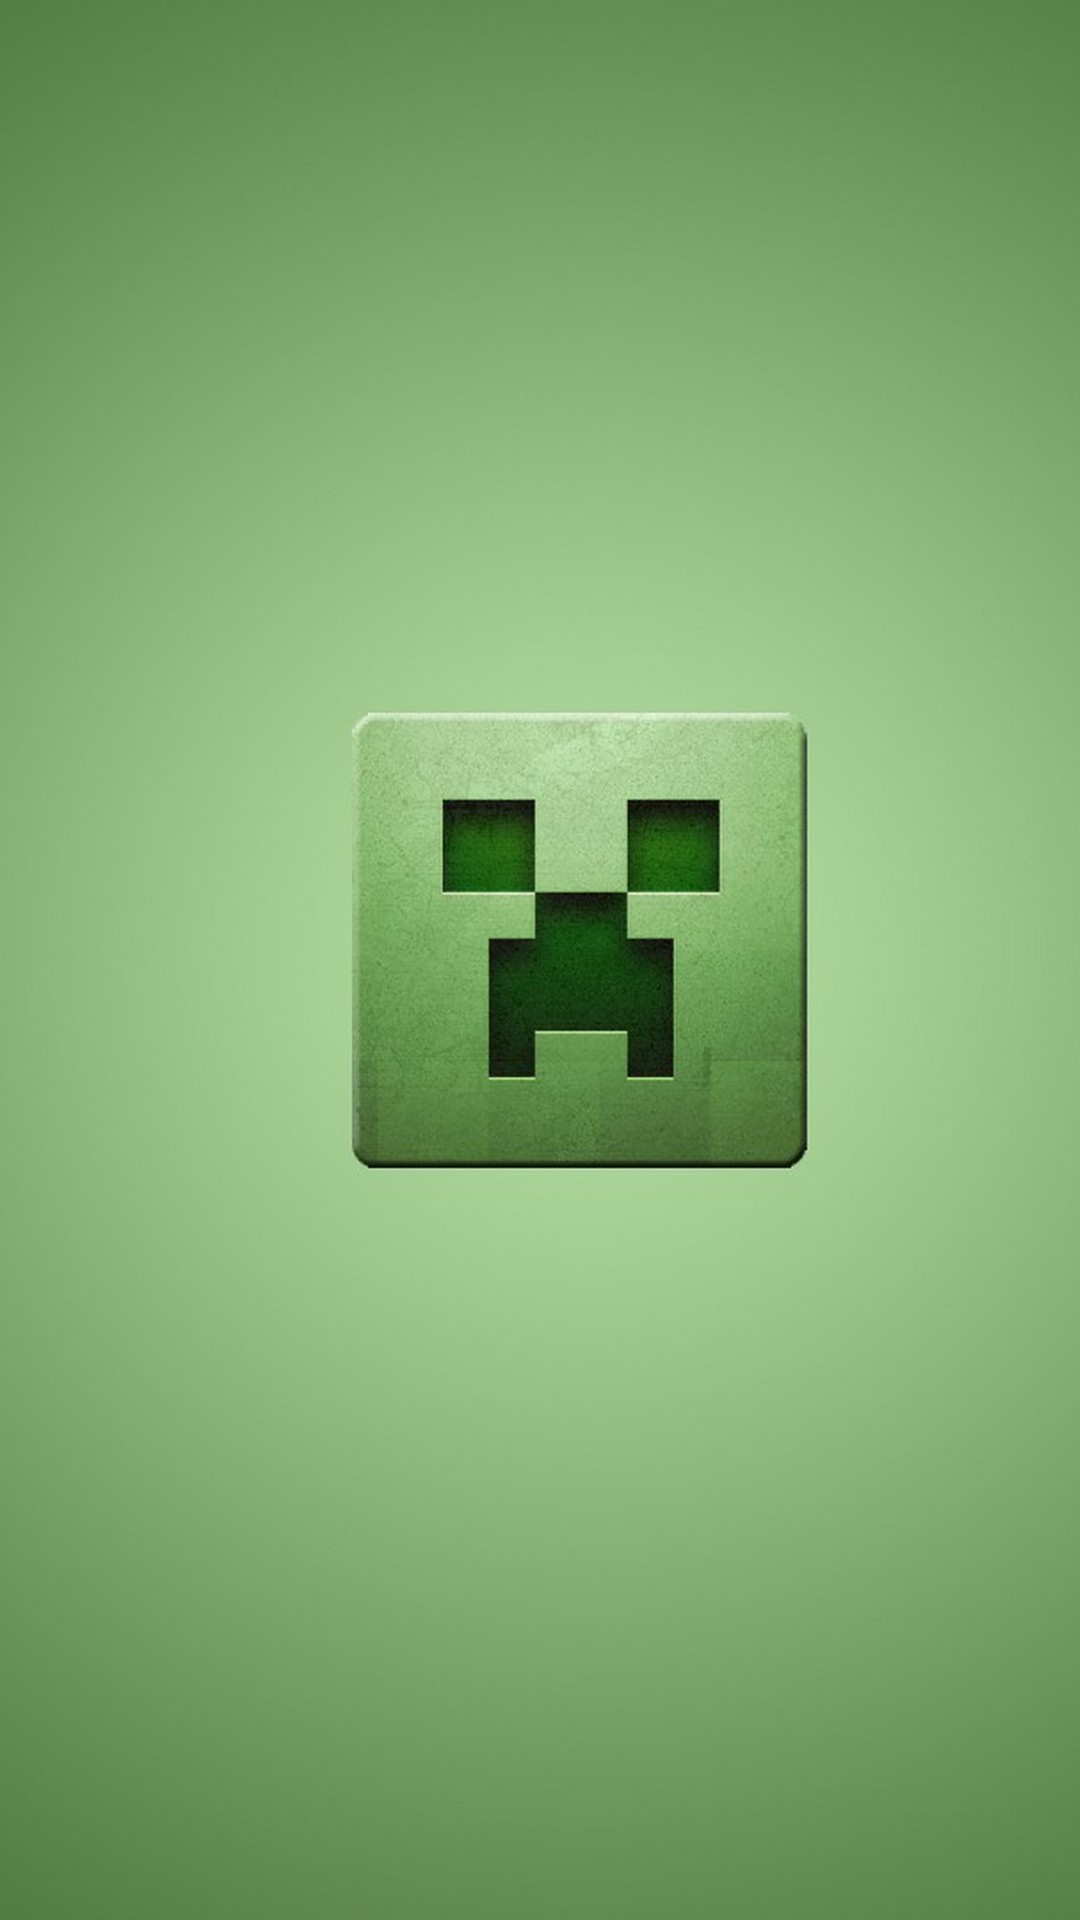 Cute Green Wallpaper For iPhone with resolution 1080X1920 pixel. You can make this wallpaper for your iPhone 5, 6, 7, 8, X backgrounds, Mobile Screensaver, or iPad Lock Screen